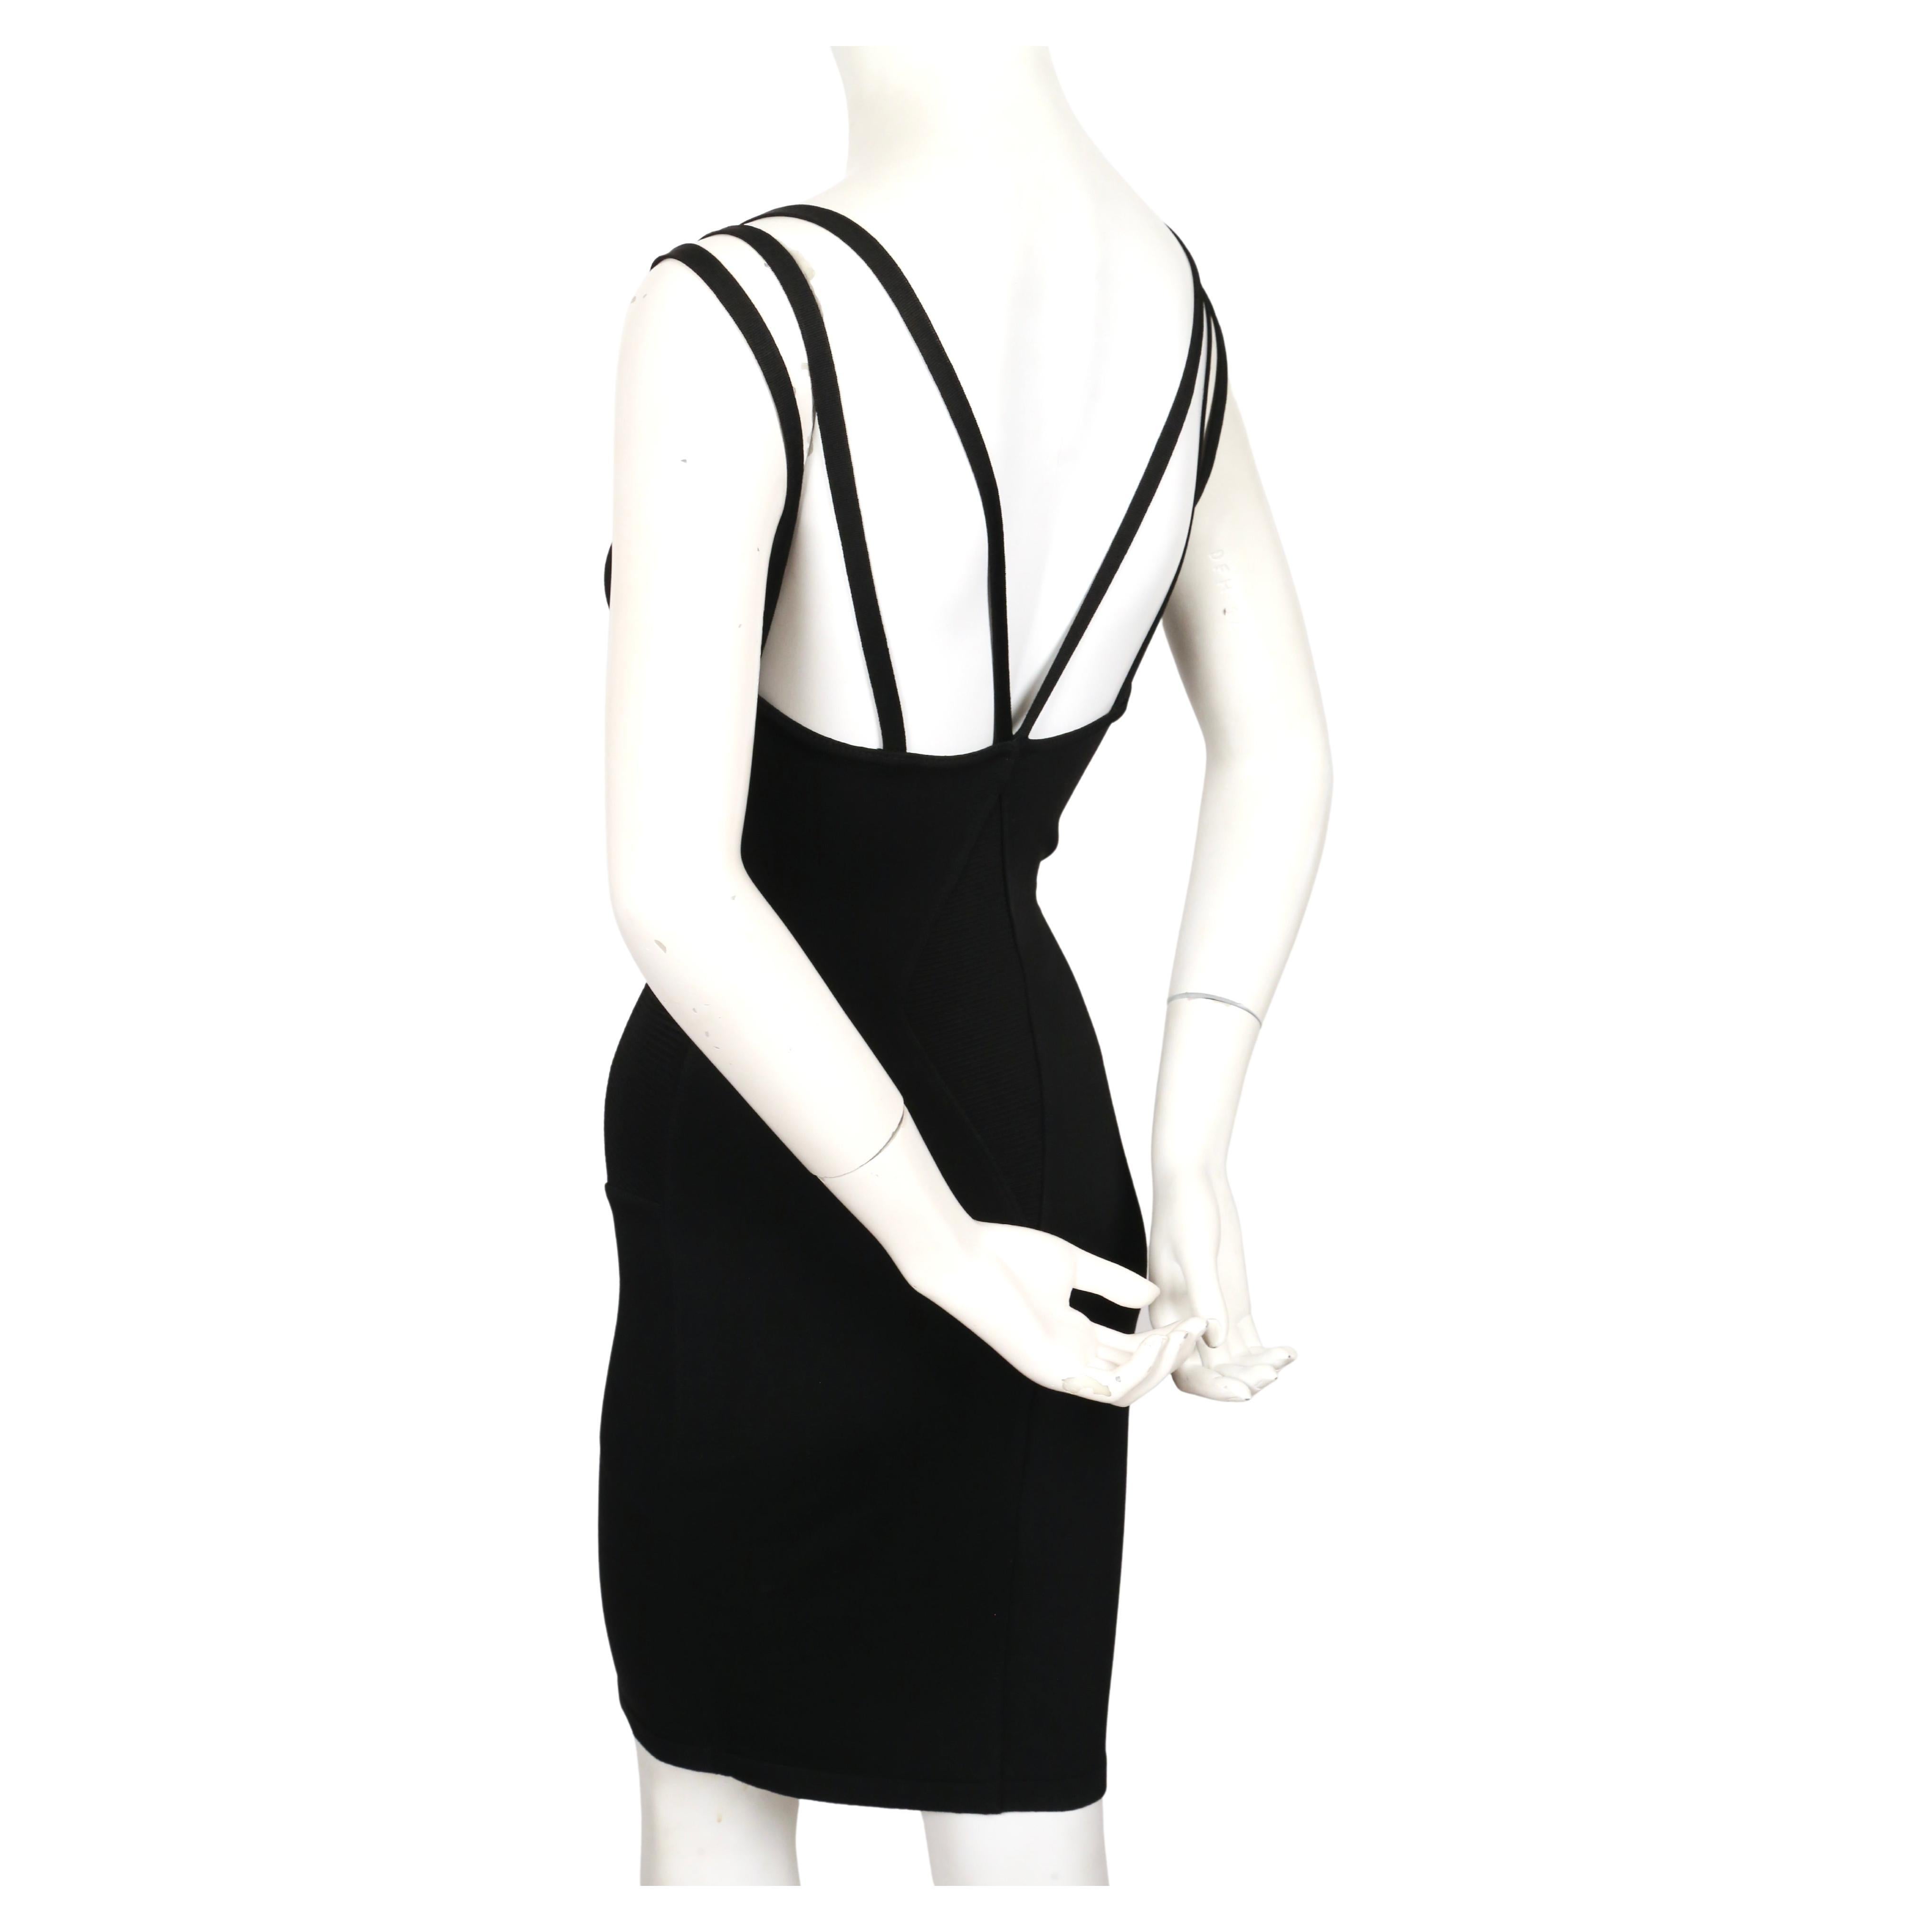 1990 AZZEDINE ALAIA black runway dress with strappy back For Sale 2